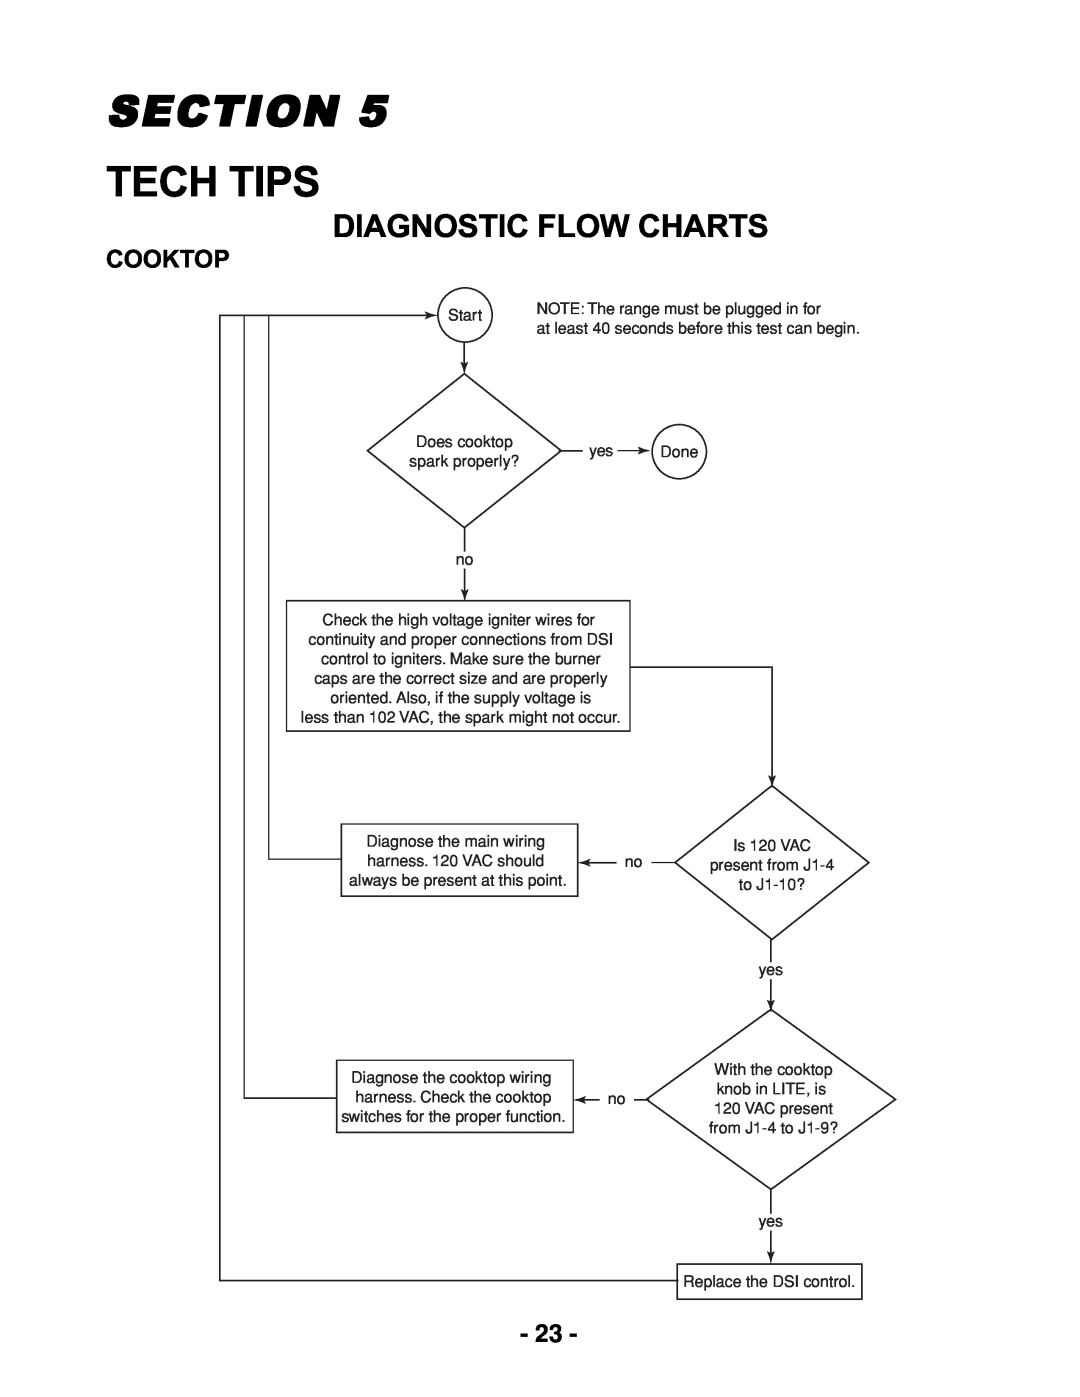 Whirlpool KR-28 manual Tech Tips, Diagnostic Flow Charts, Section, Cooktop 